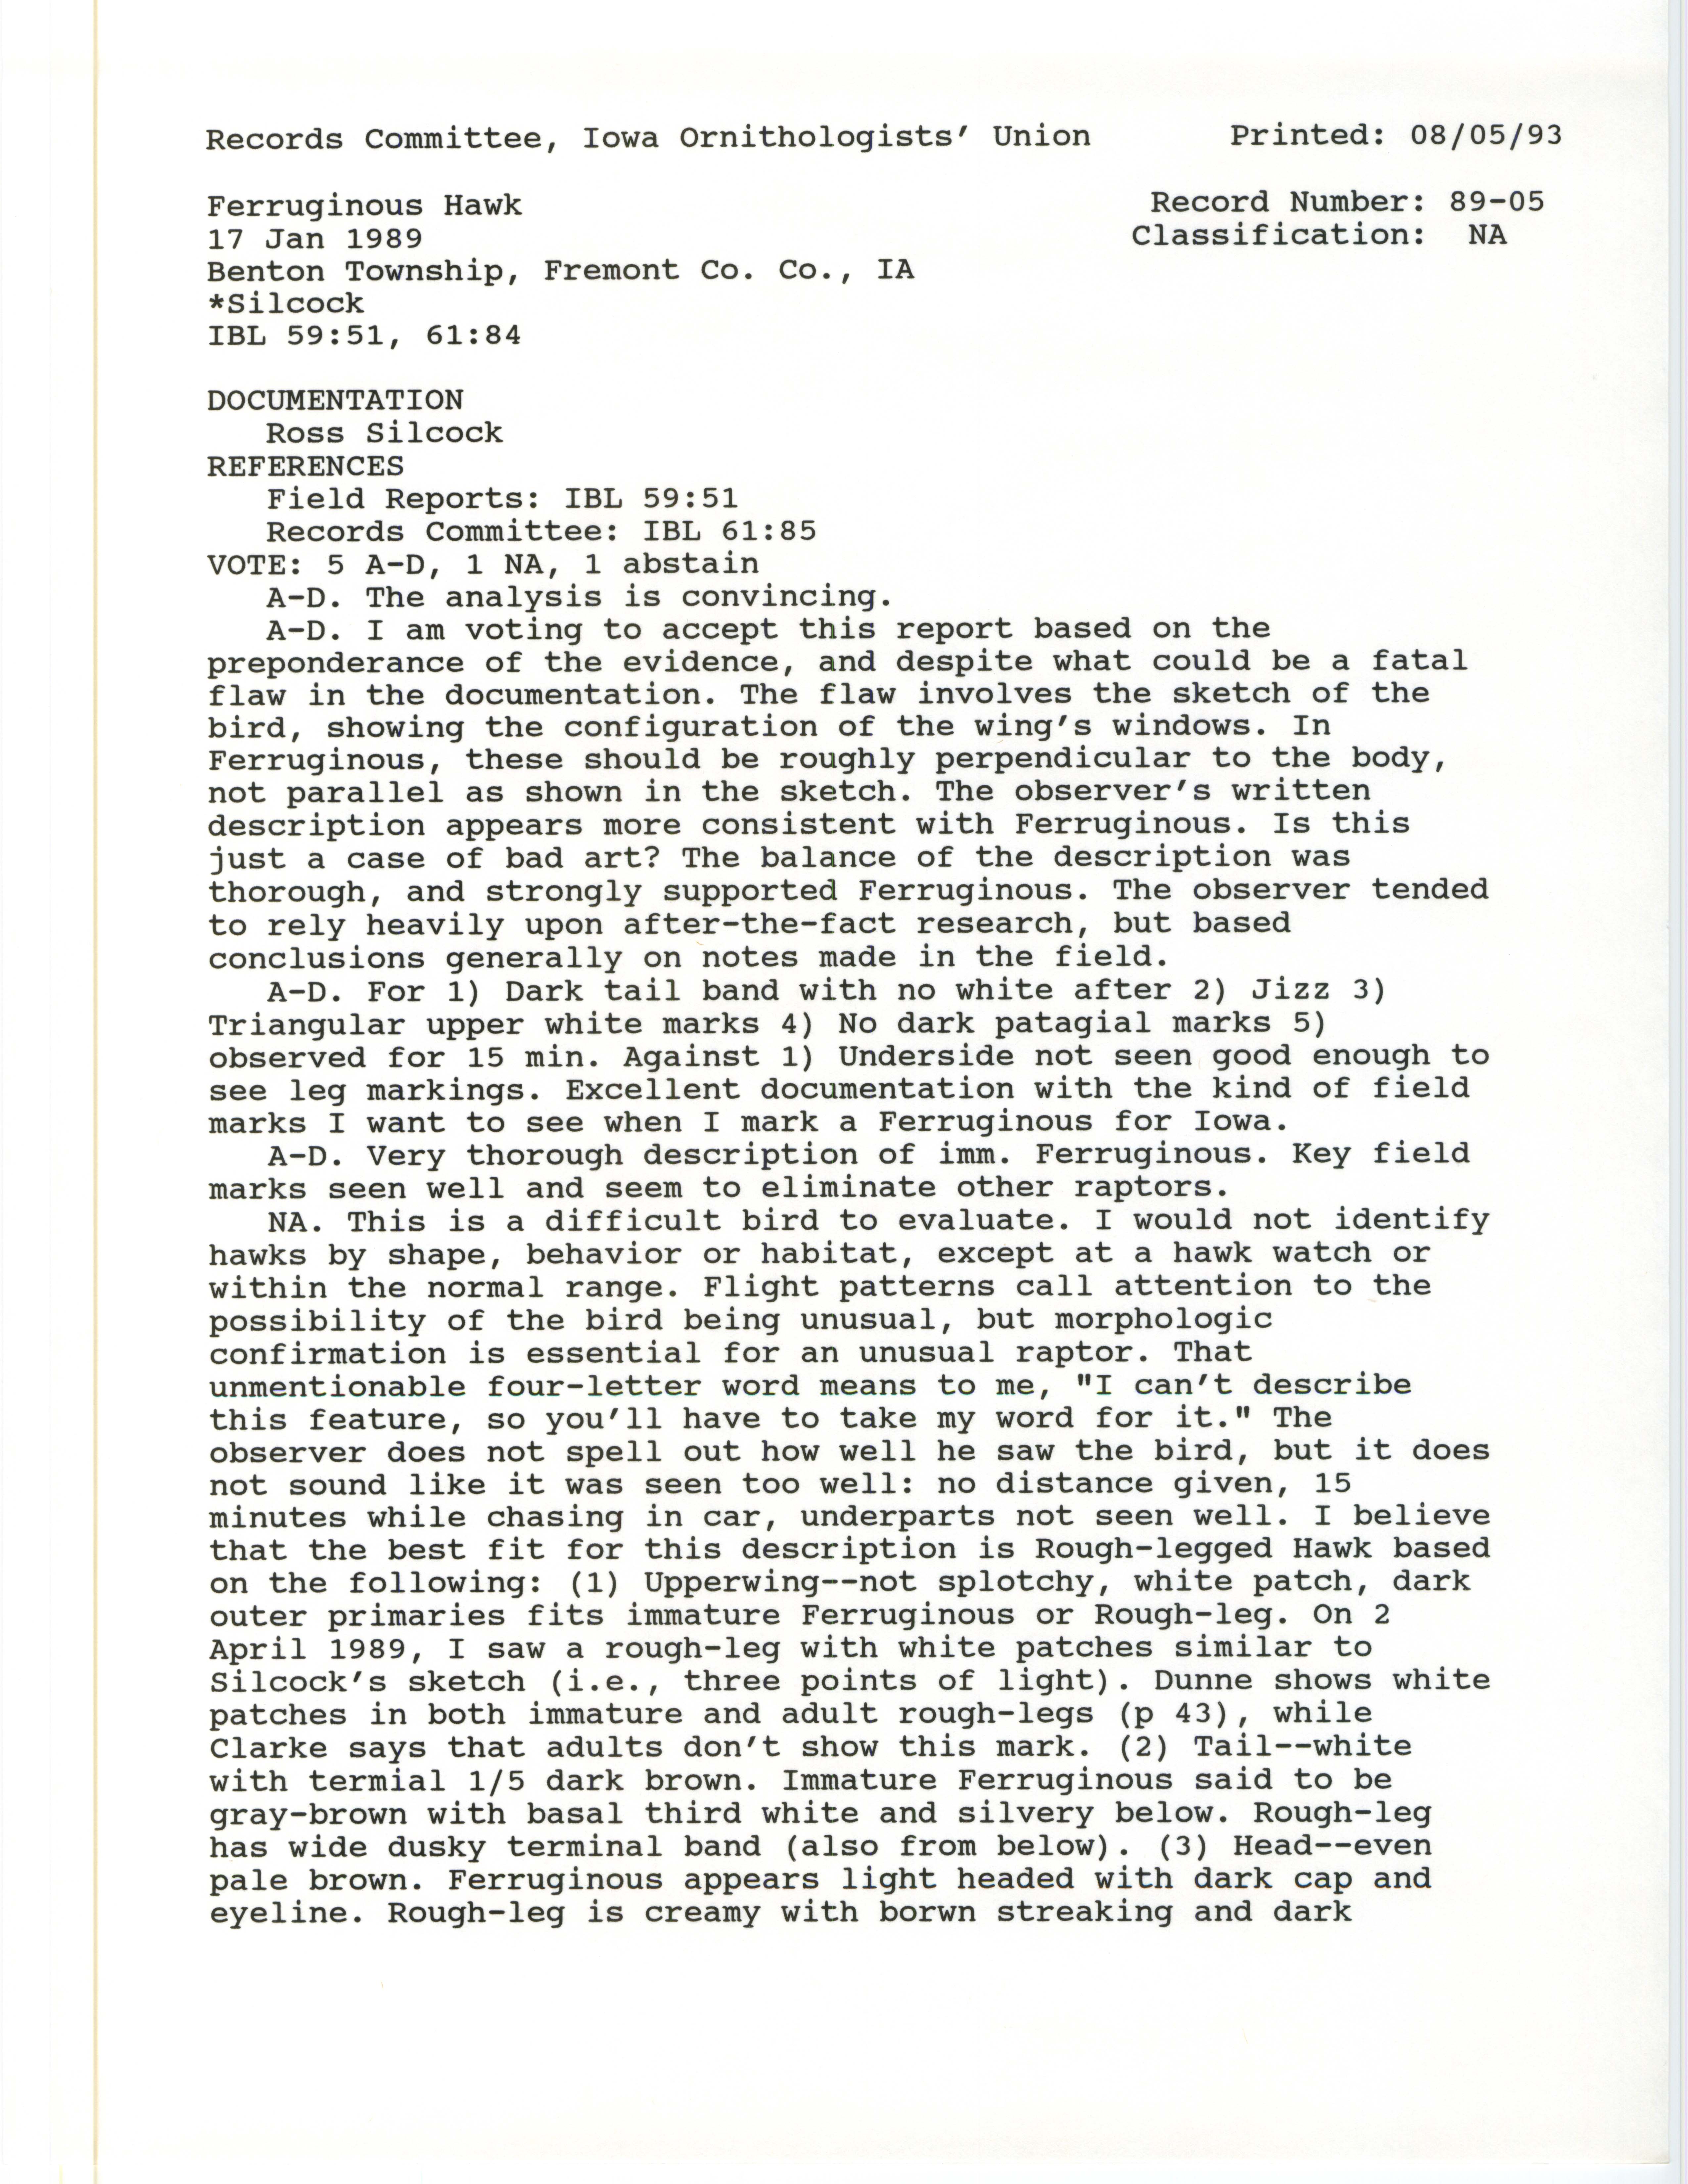 Records Committee review for rare bird sighting of Ferruginous Hawk at Benton Township in Fremont County, 1989